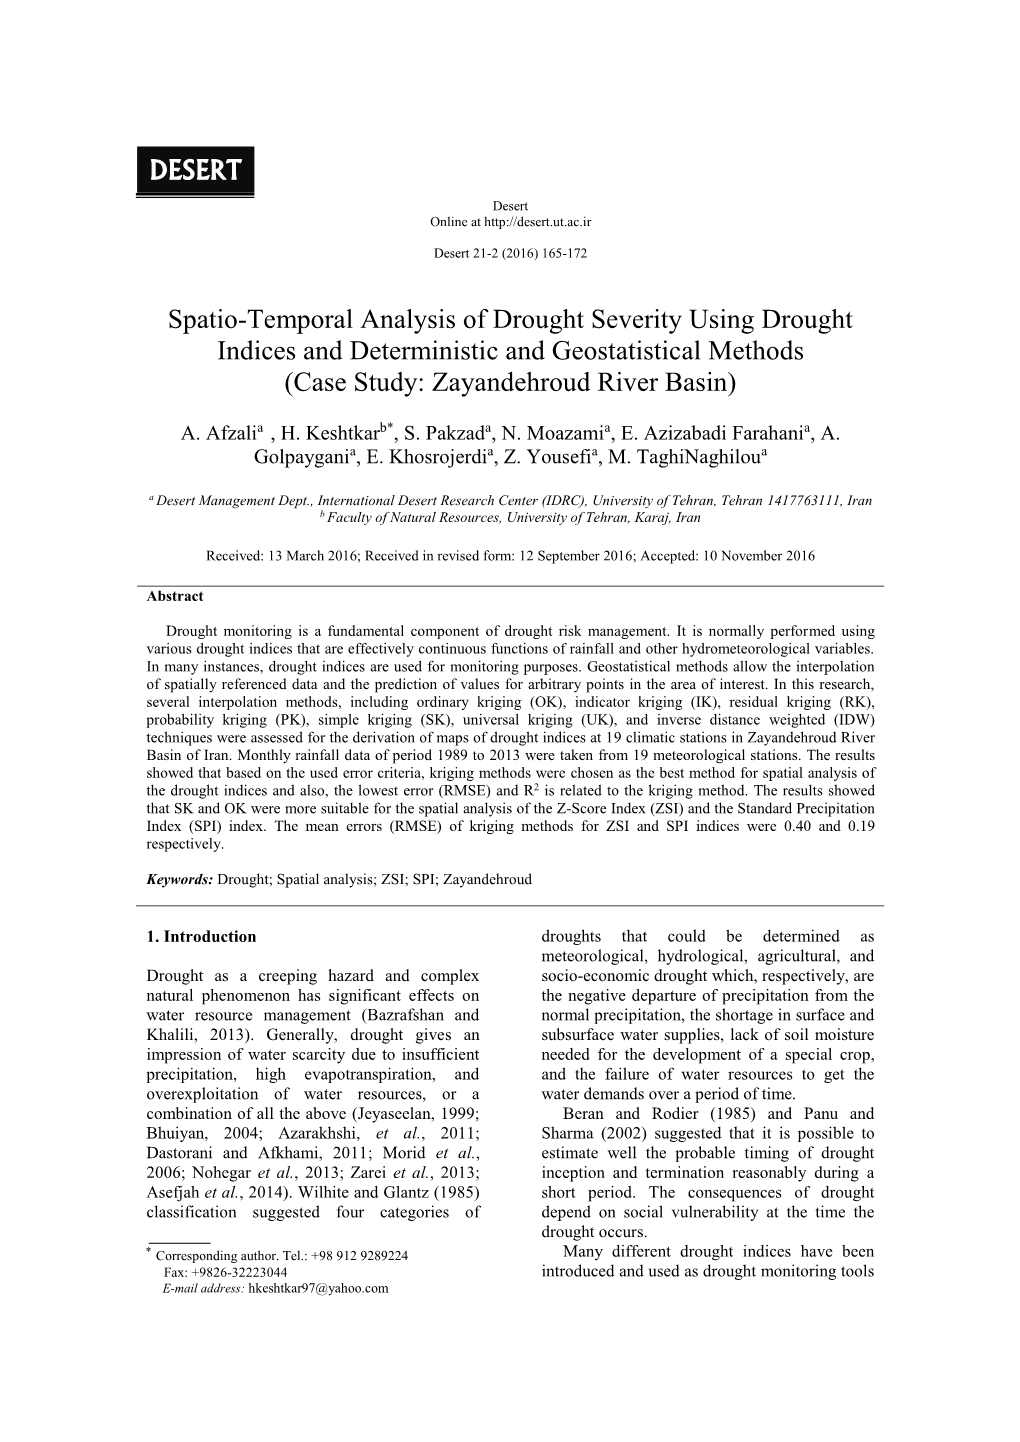 Spatio-Temporal Analysis of Drought Severity Using Drought Indices and Deterministic and Geostatistical Methods (Case Study: Zayandehroud River Basin)